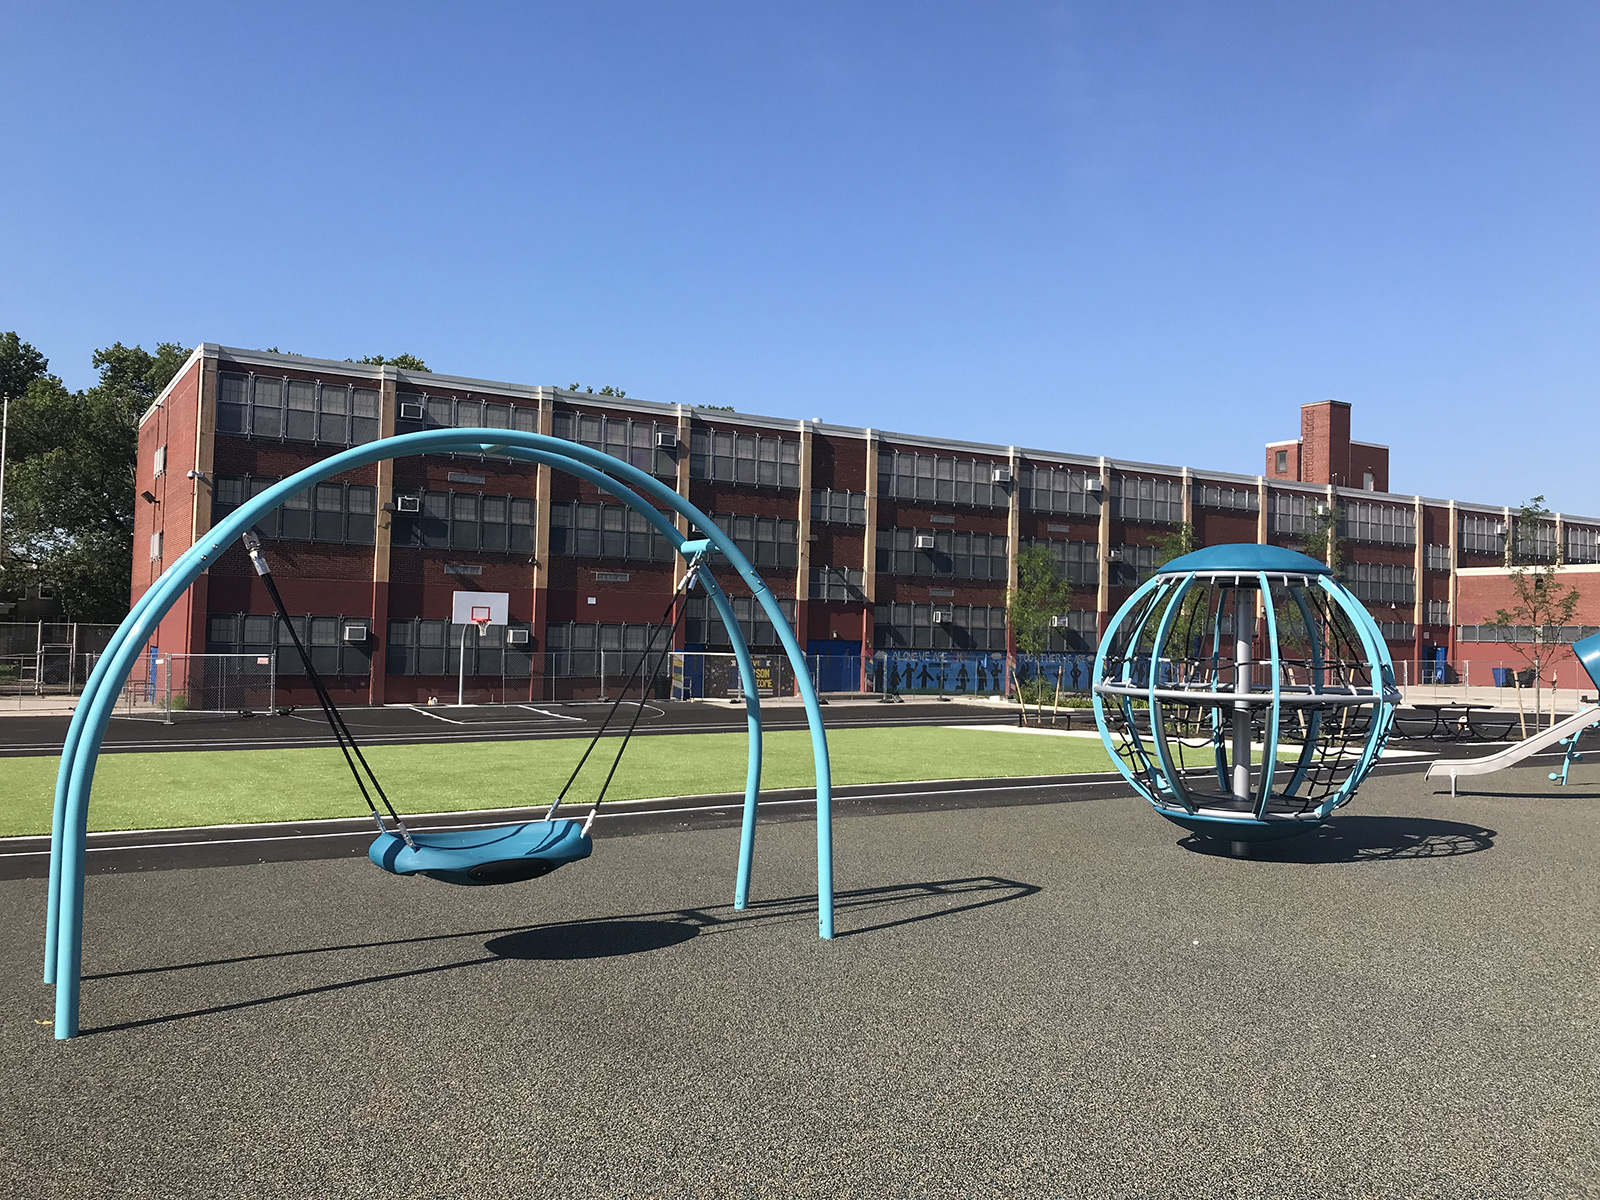 Playground at Add B. Anderson Elementary